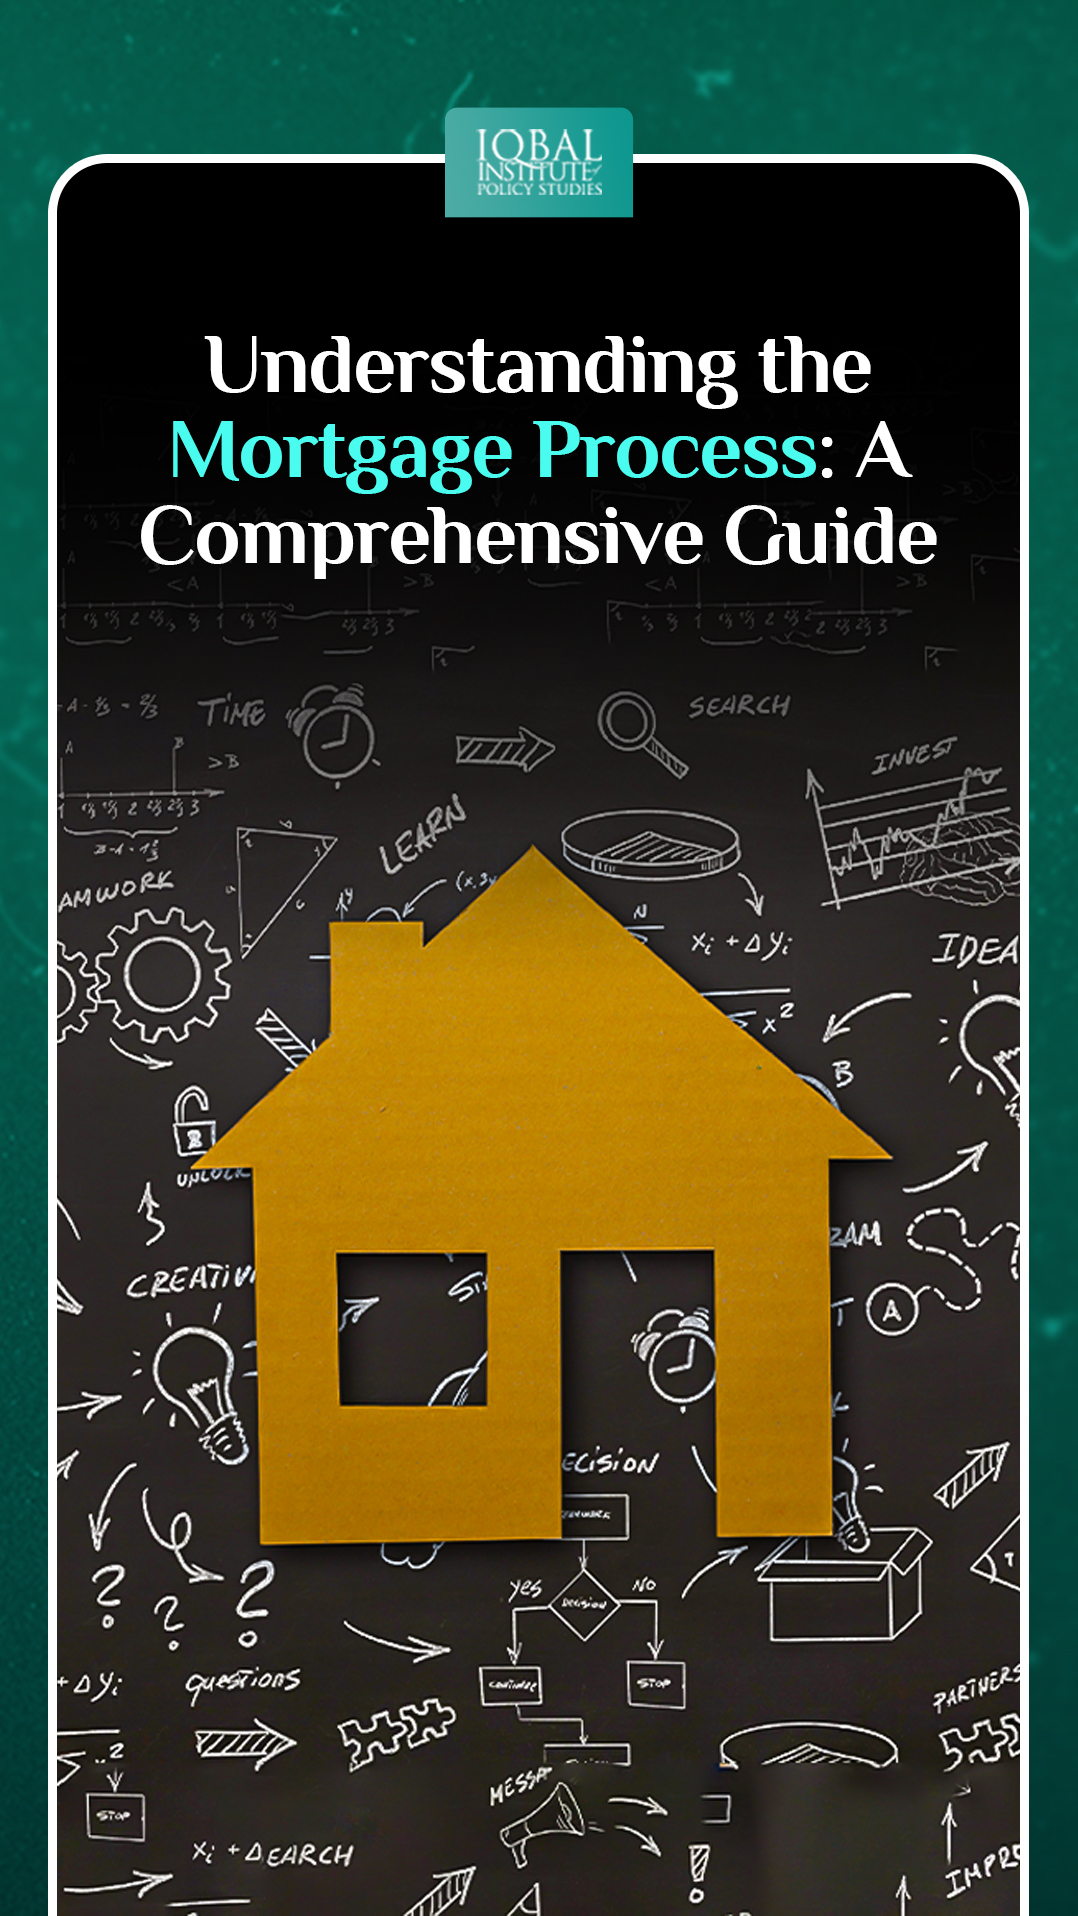 Understanding the Mortgage Process: A Comprehensive Guide